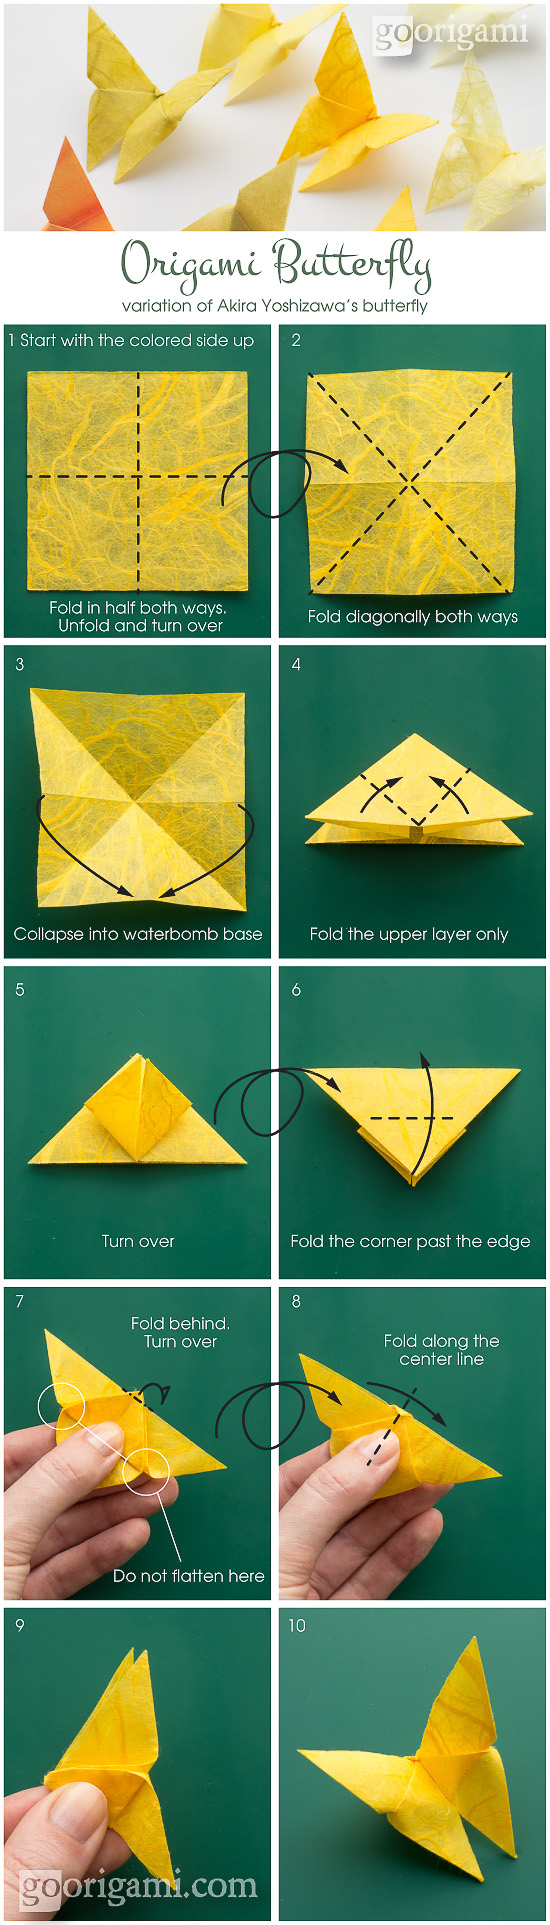 how to make origami butterfly step by step